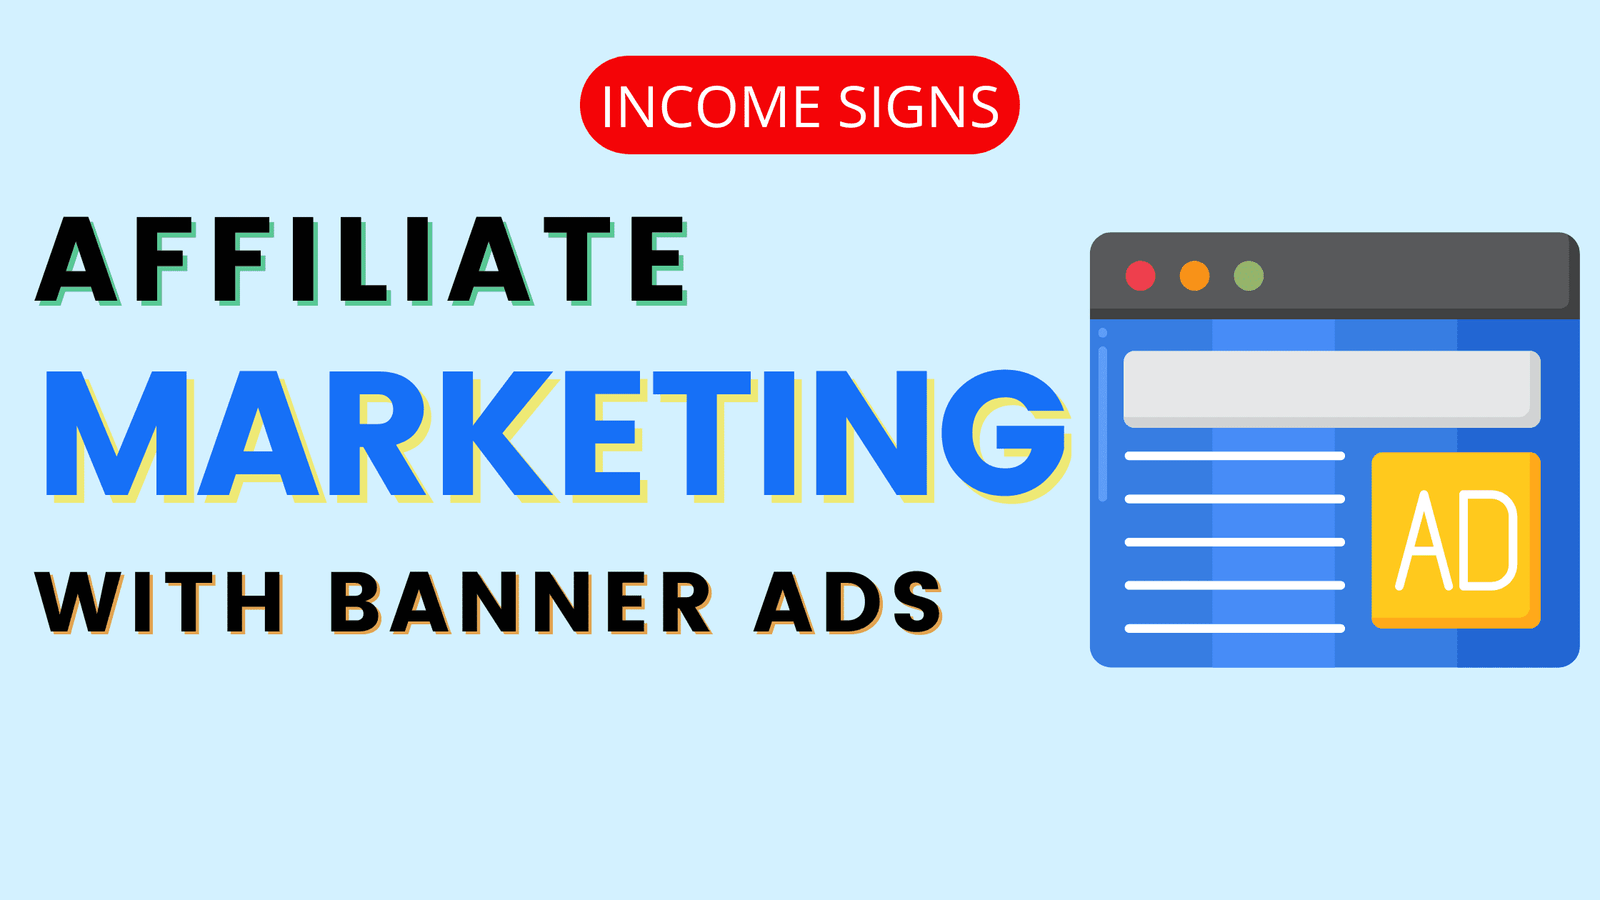 Affiliate Marketing With Banner Ads